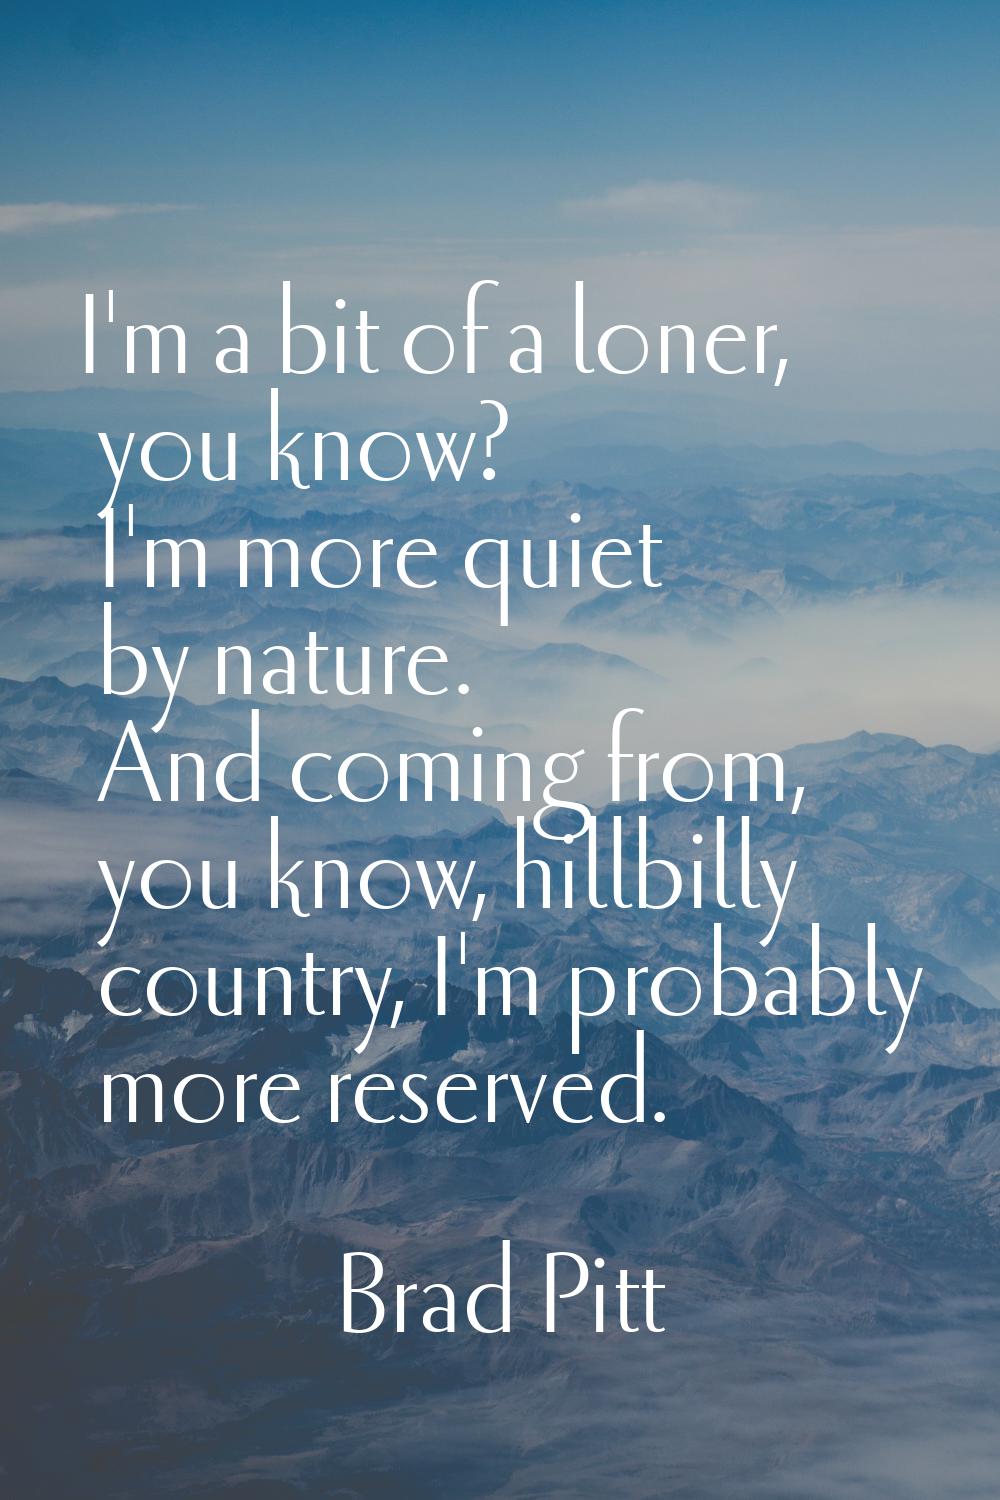 I'm a bit of a loner, you know? I'm more quiet by nature. And coming from, you know, hillbilly coun